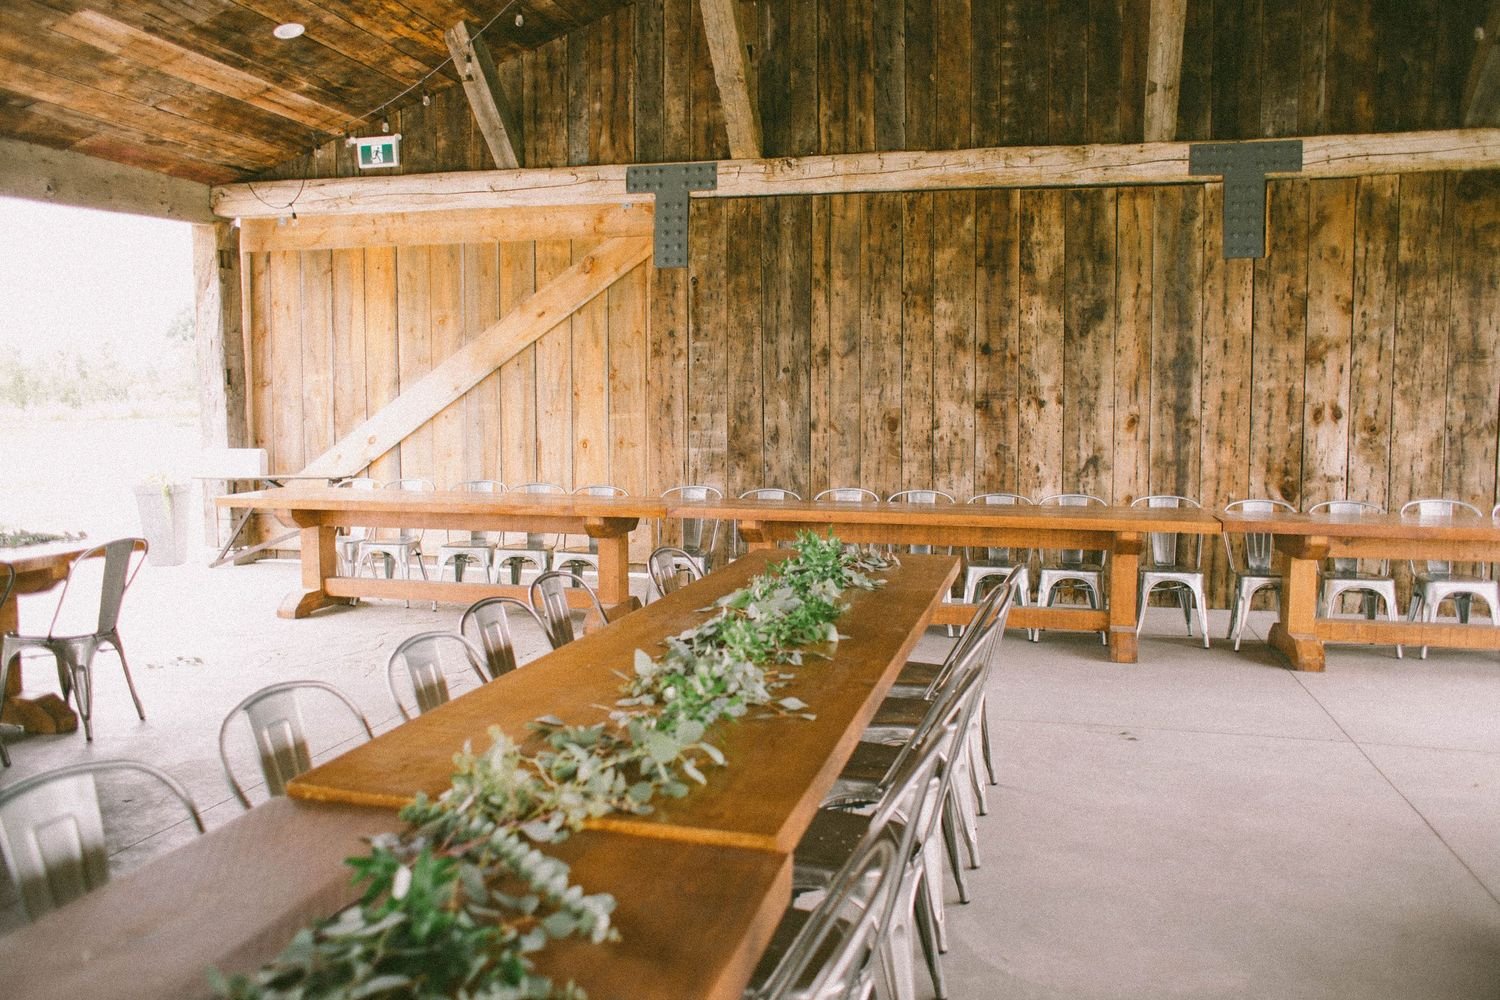 Brantview_Apples_and_Cider_Wedding_Venue_7_of_23-a5242bce.jpg